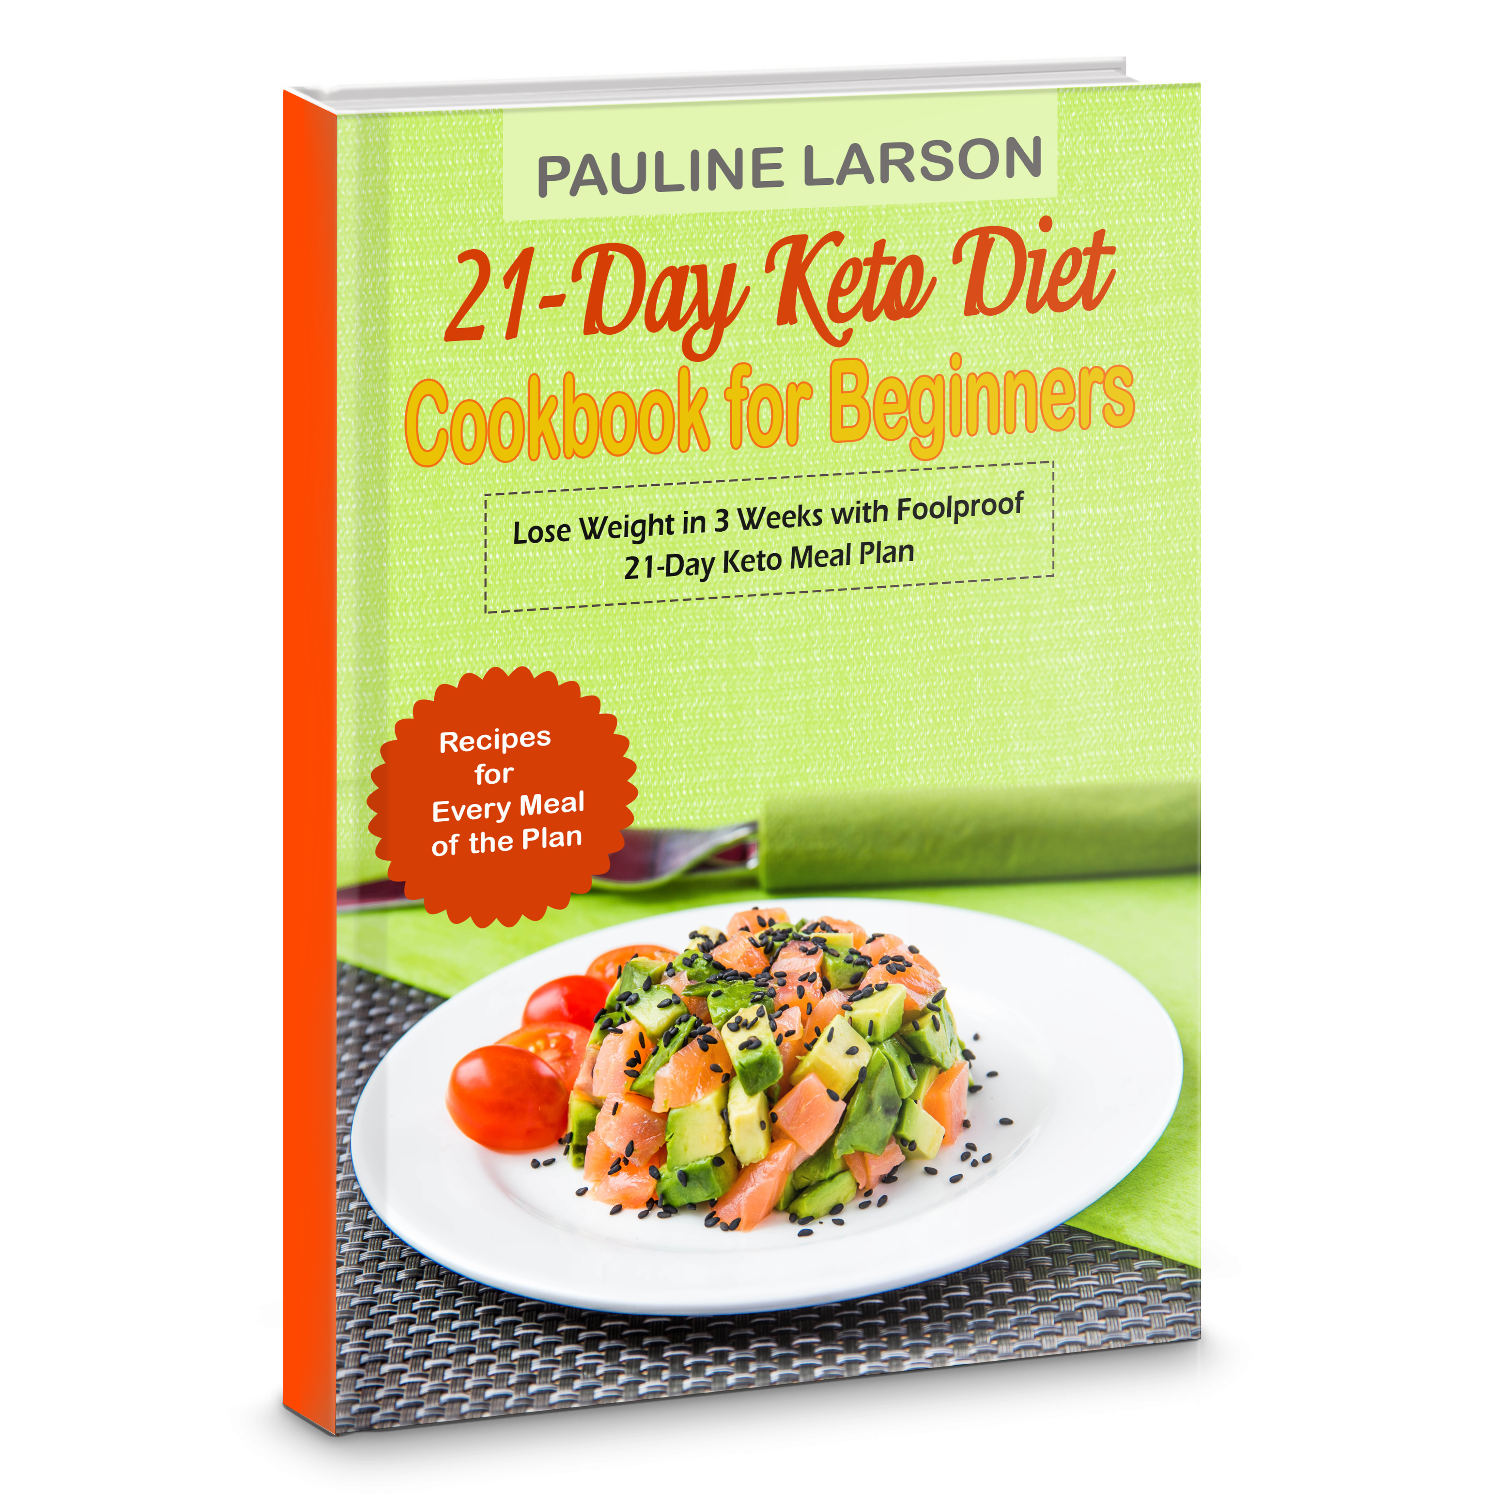 FREE: 21-Day Keto Diet Cookbook for Beginners: Lose Weight in 3 Weeks with Foolproof 21-Day Keto Meal Plan Incl. Recipes for Every Meal of the Plan by Pauline Larson